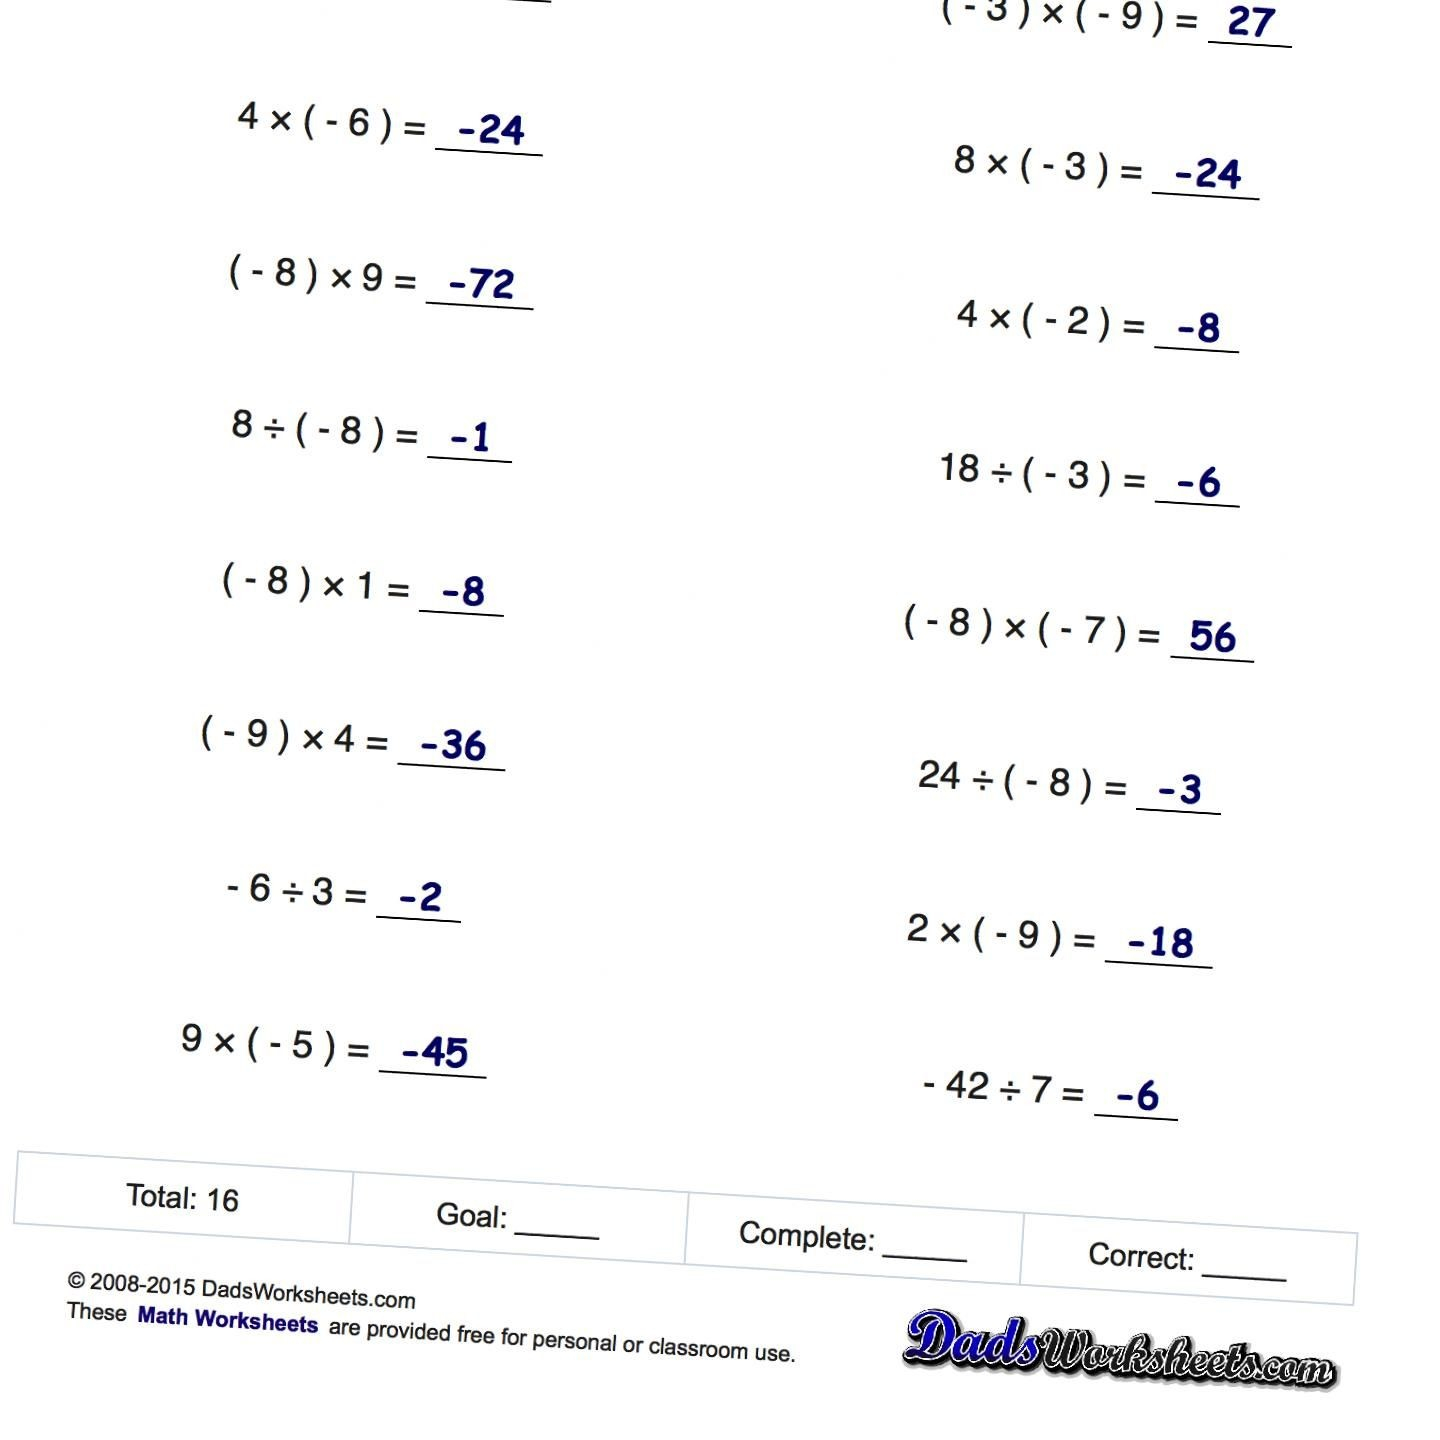 printable-6th-grade-math-worksheets-with-answer-key-math-worksheets-free-printable-6th-grade